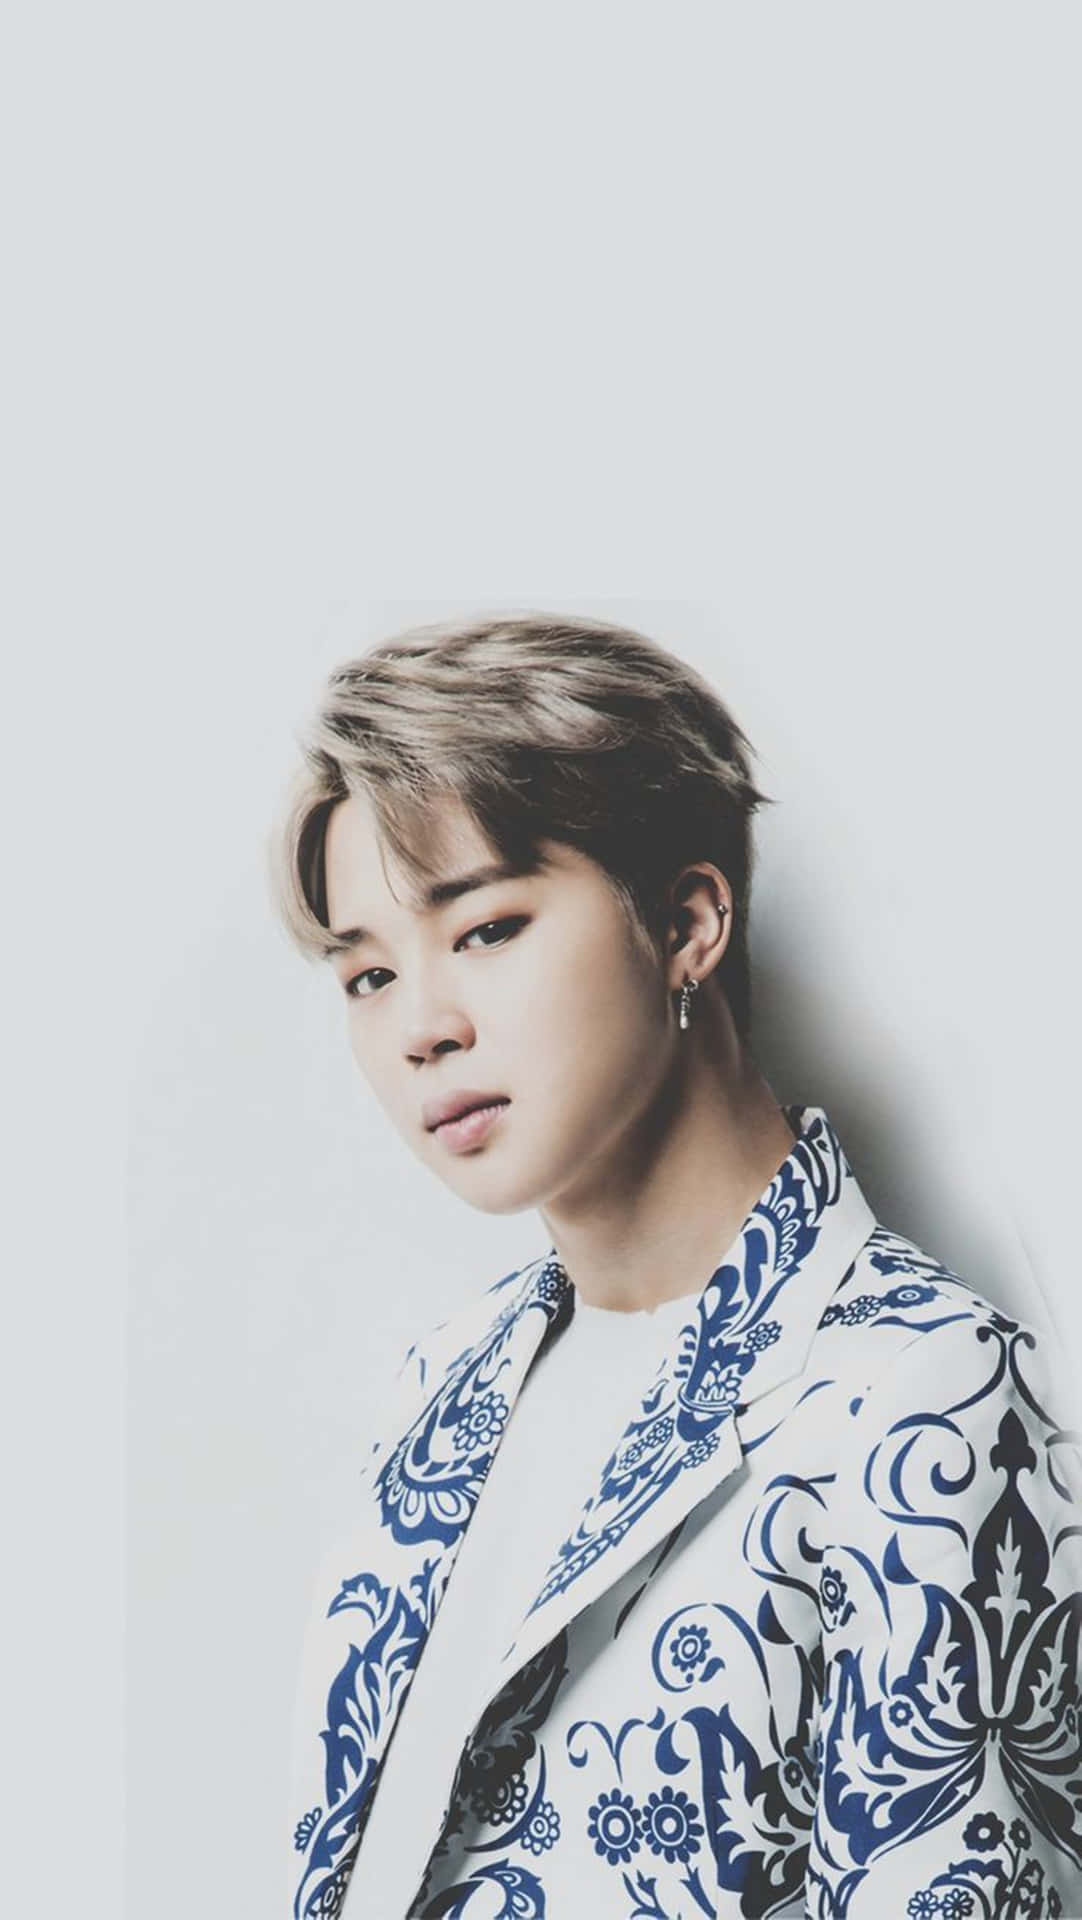 Jimin From Bts In A Stunning Hd Pose